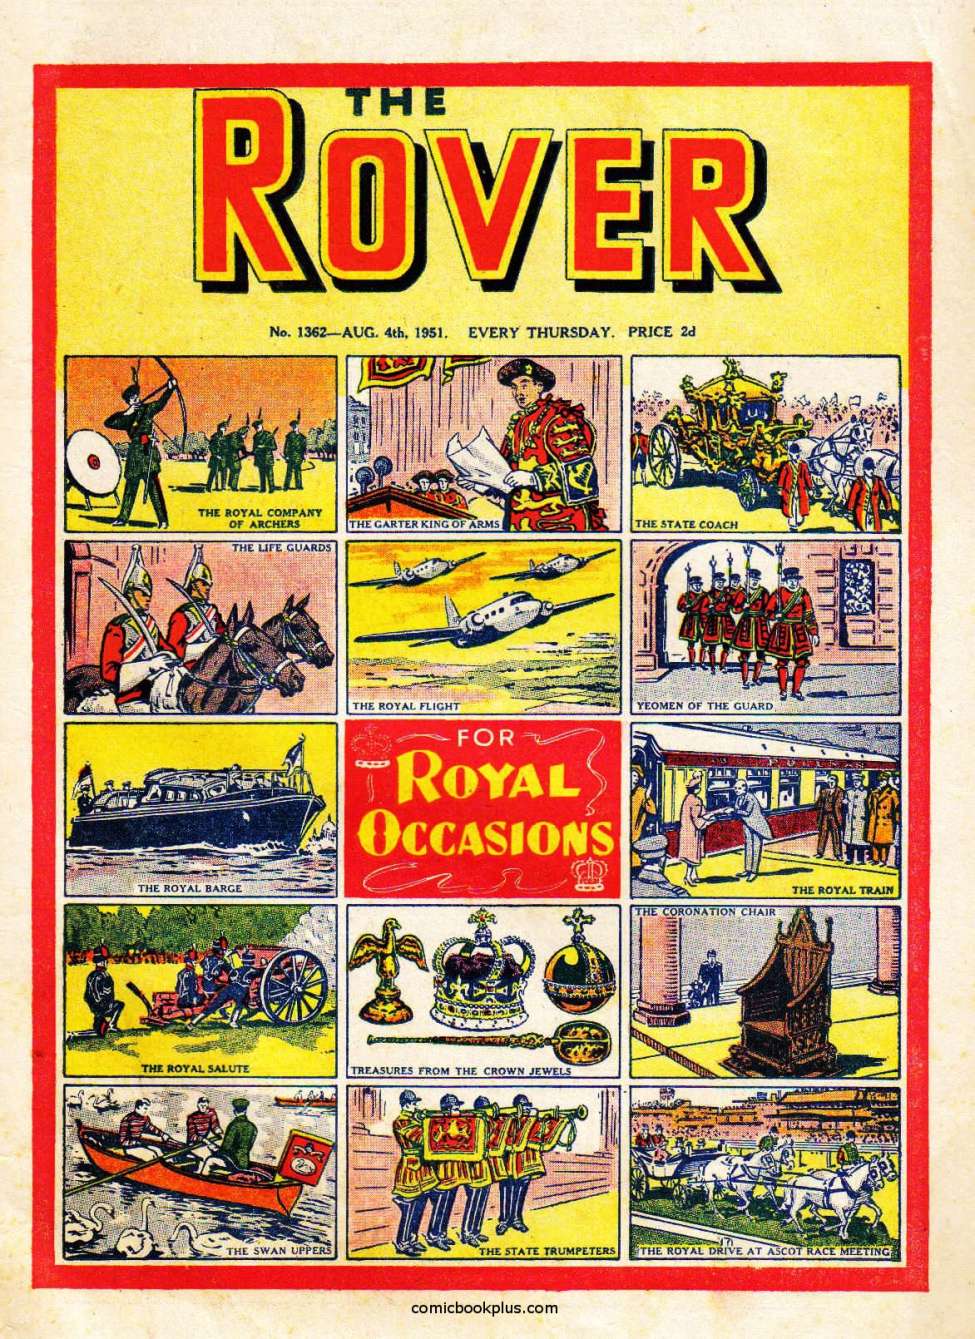 Book Cover For The Rover 1362